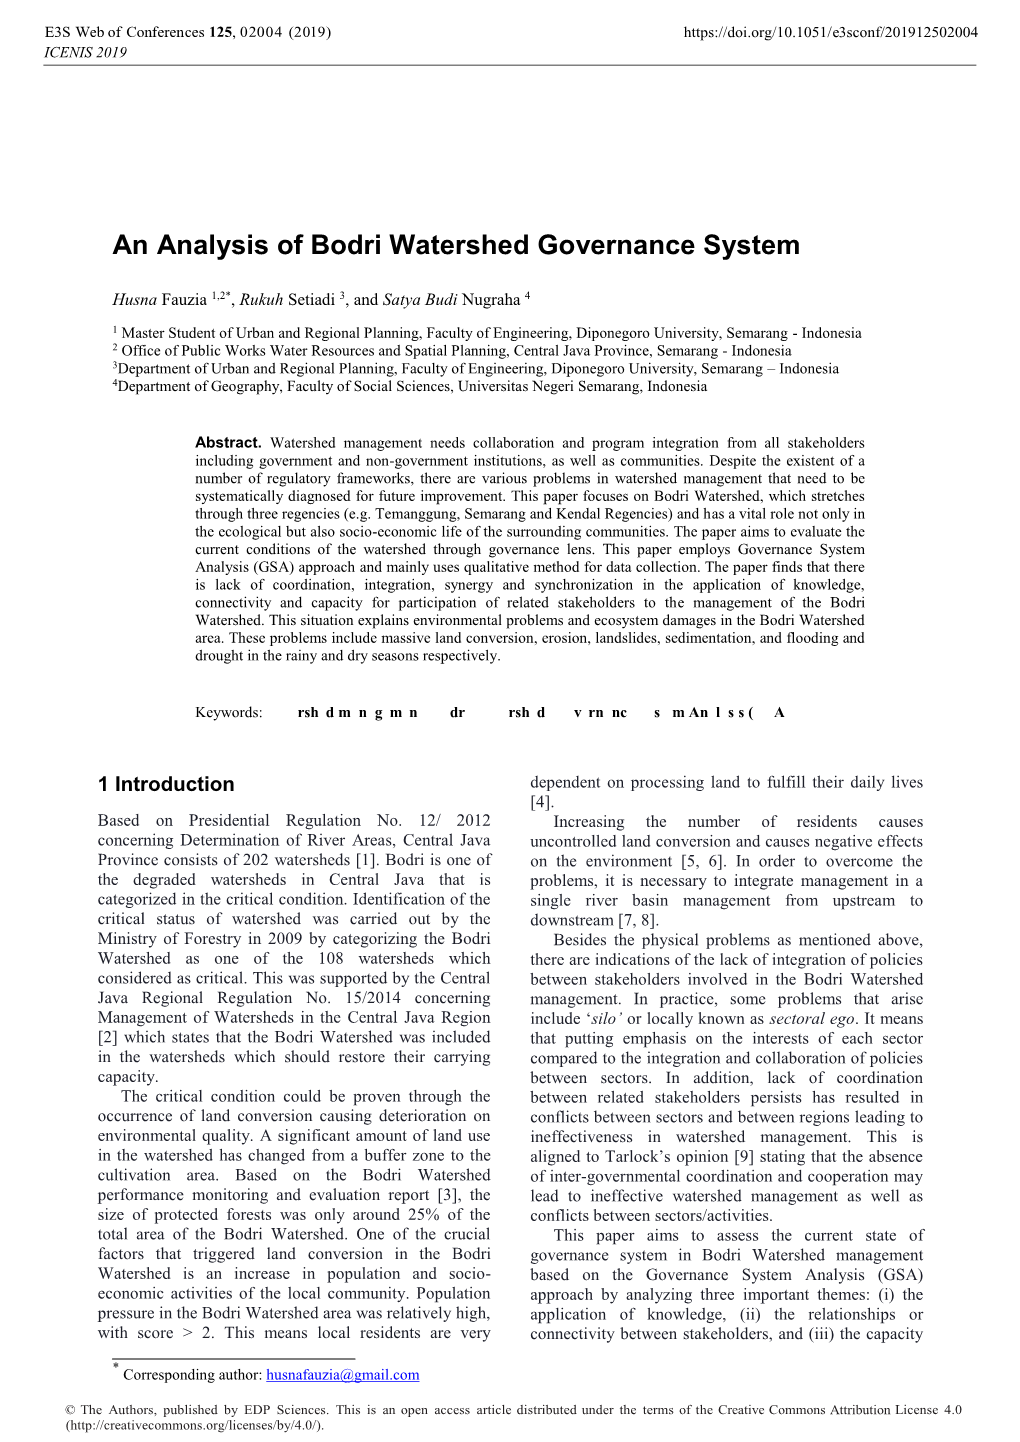 An Analysis of Bodri Watershed Governance System